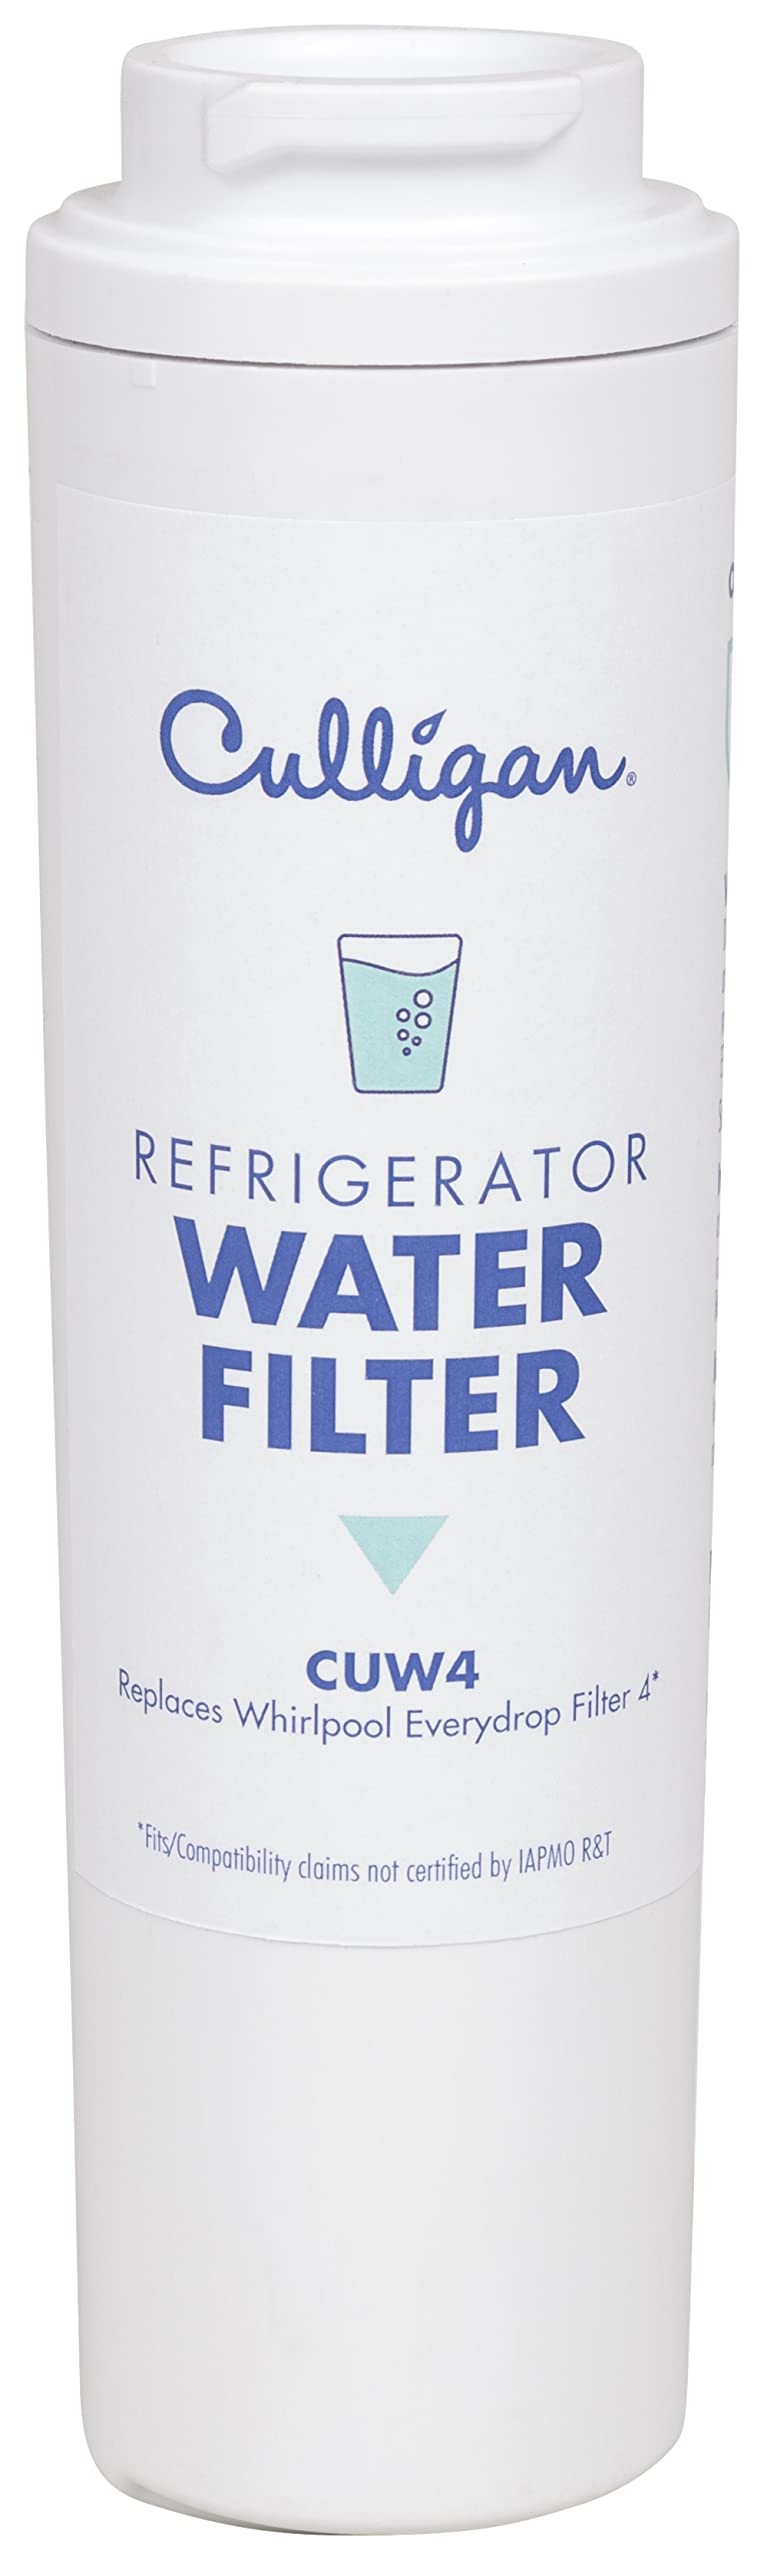 Culligan CUW4 Refrigerator Water Filter | Replacement for Whirlpool Water Filter 4 (EDR4RXD1) | Replace Every 6 Months | Pack of 1